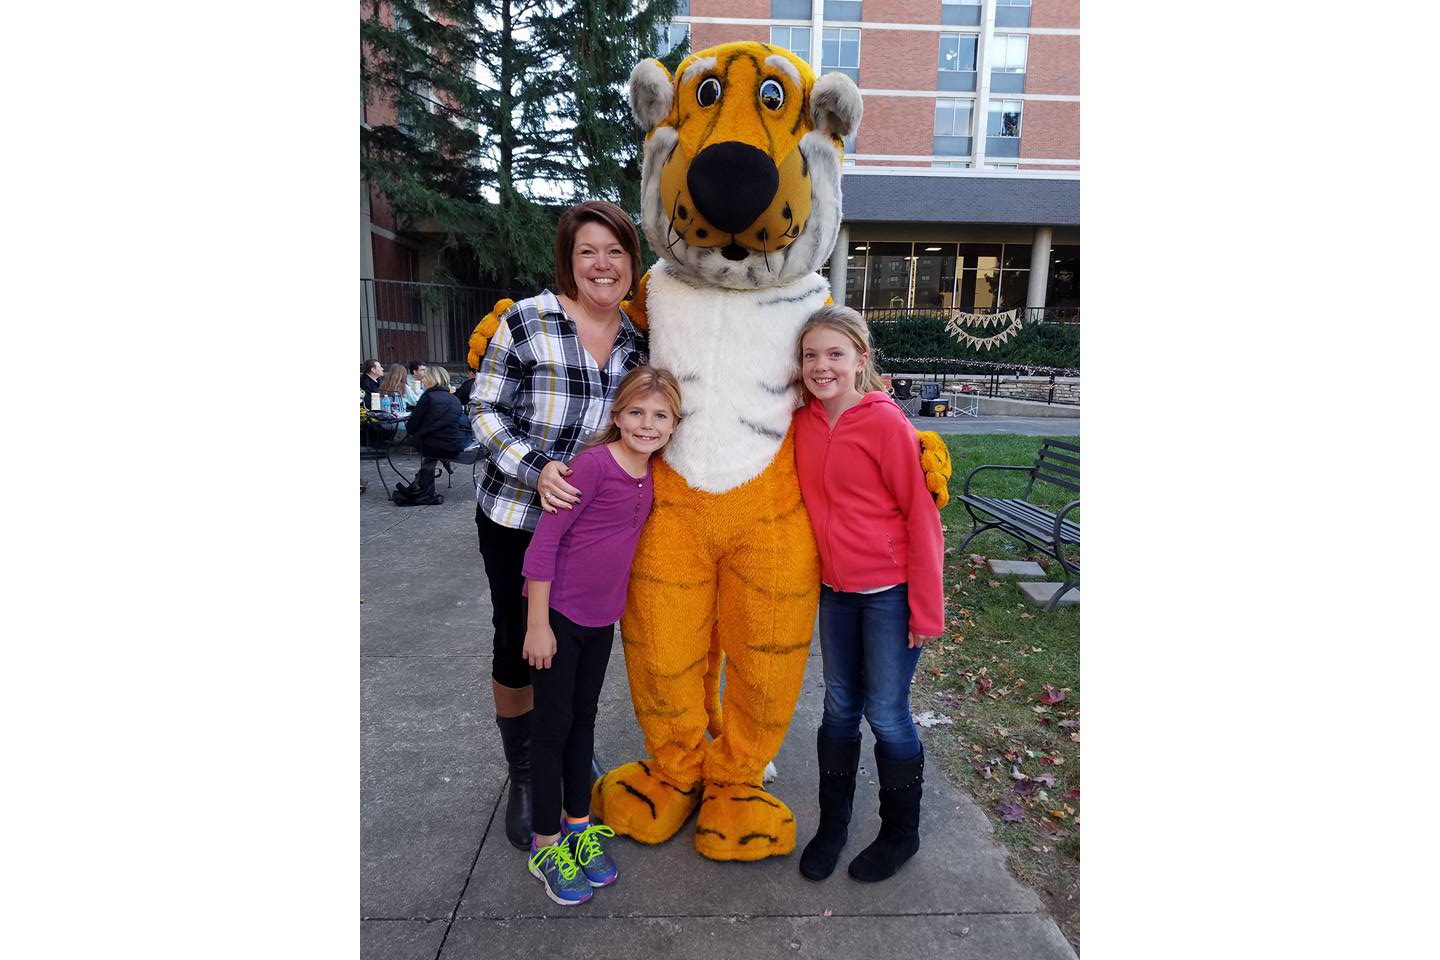 Megan Silvey and her daughters pose for a photo with truman the tiger